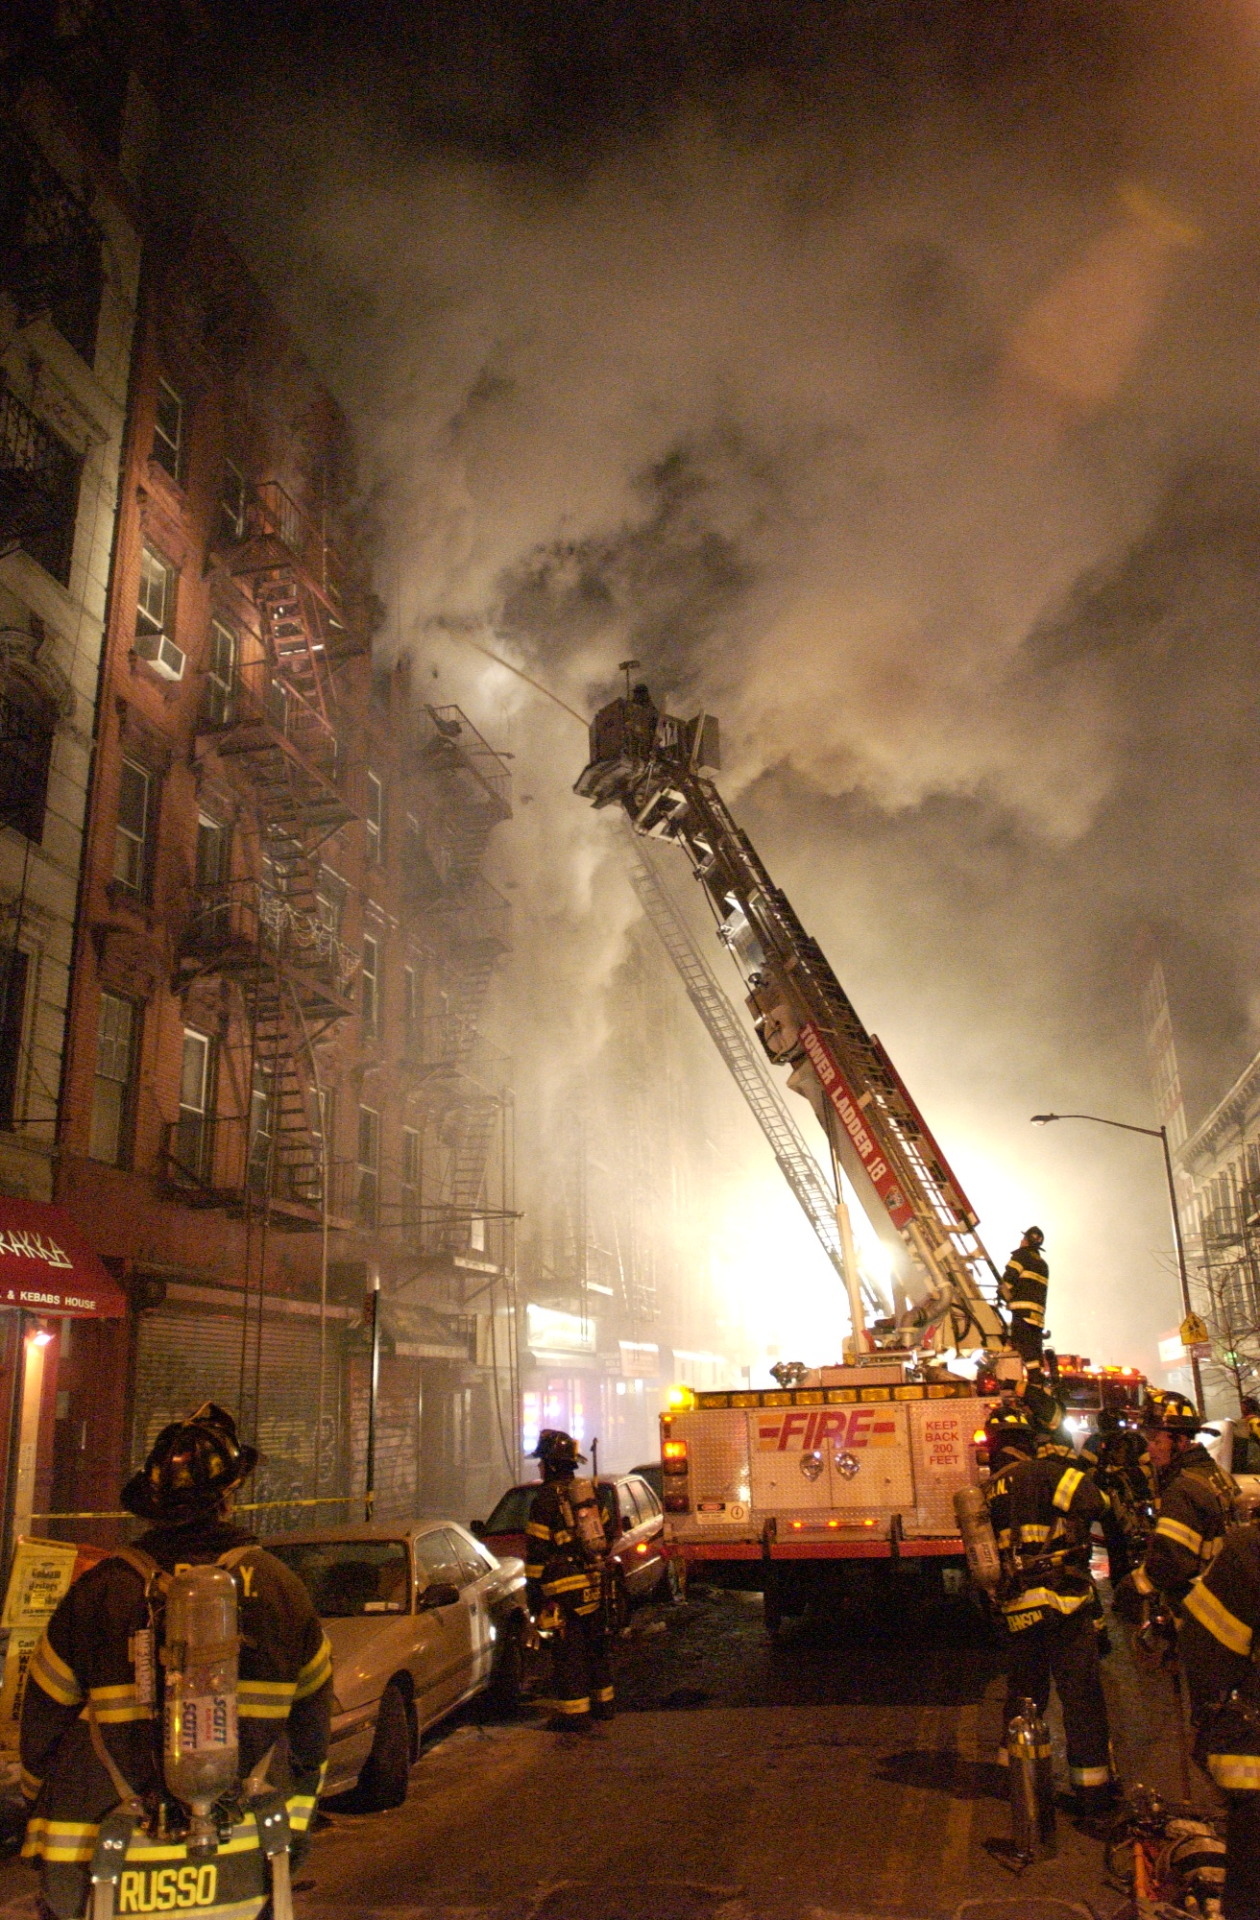 FDNY firefighters respond to a 3-alarm fire in Manhattan, 2004.